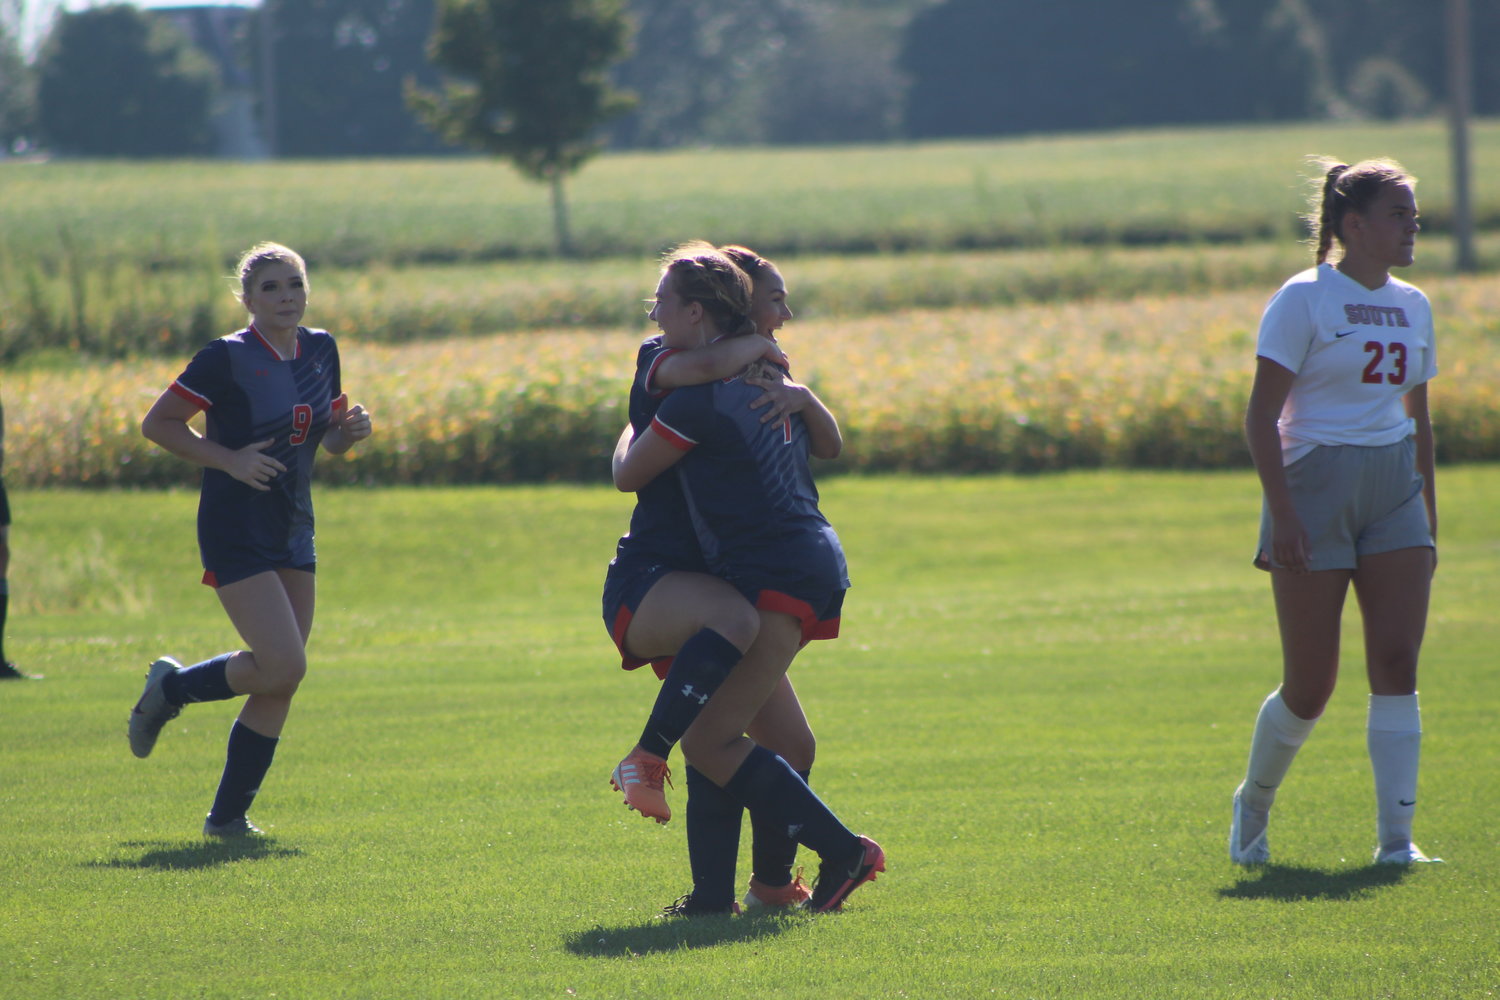 Teegan Bacon celebrates one of her two goals with her teammates against county rival Southmont.